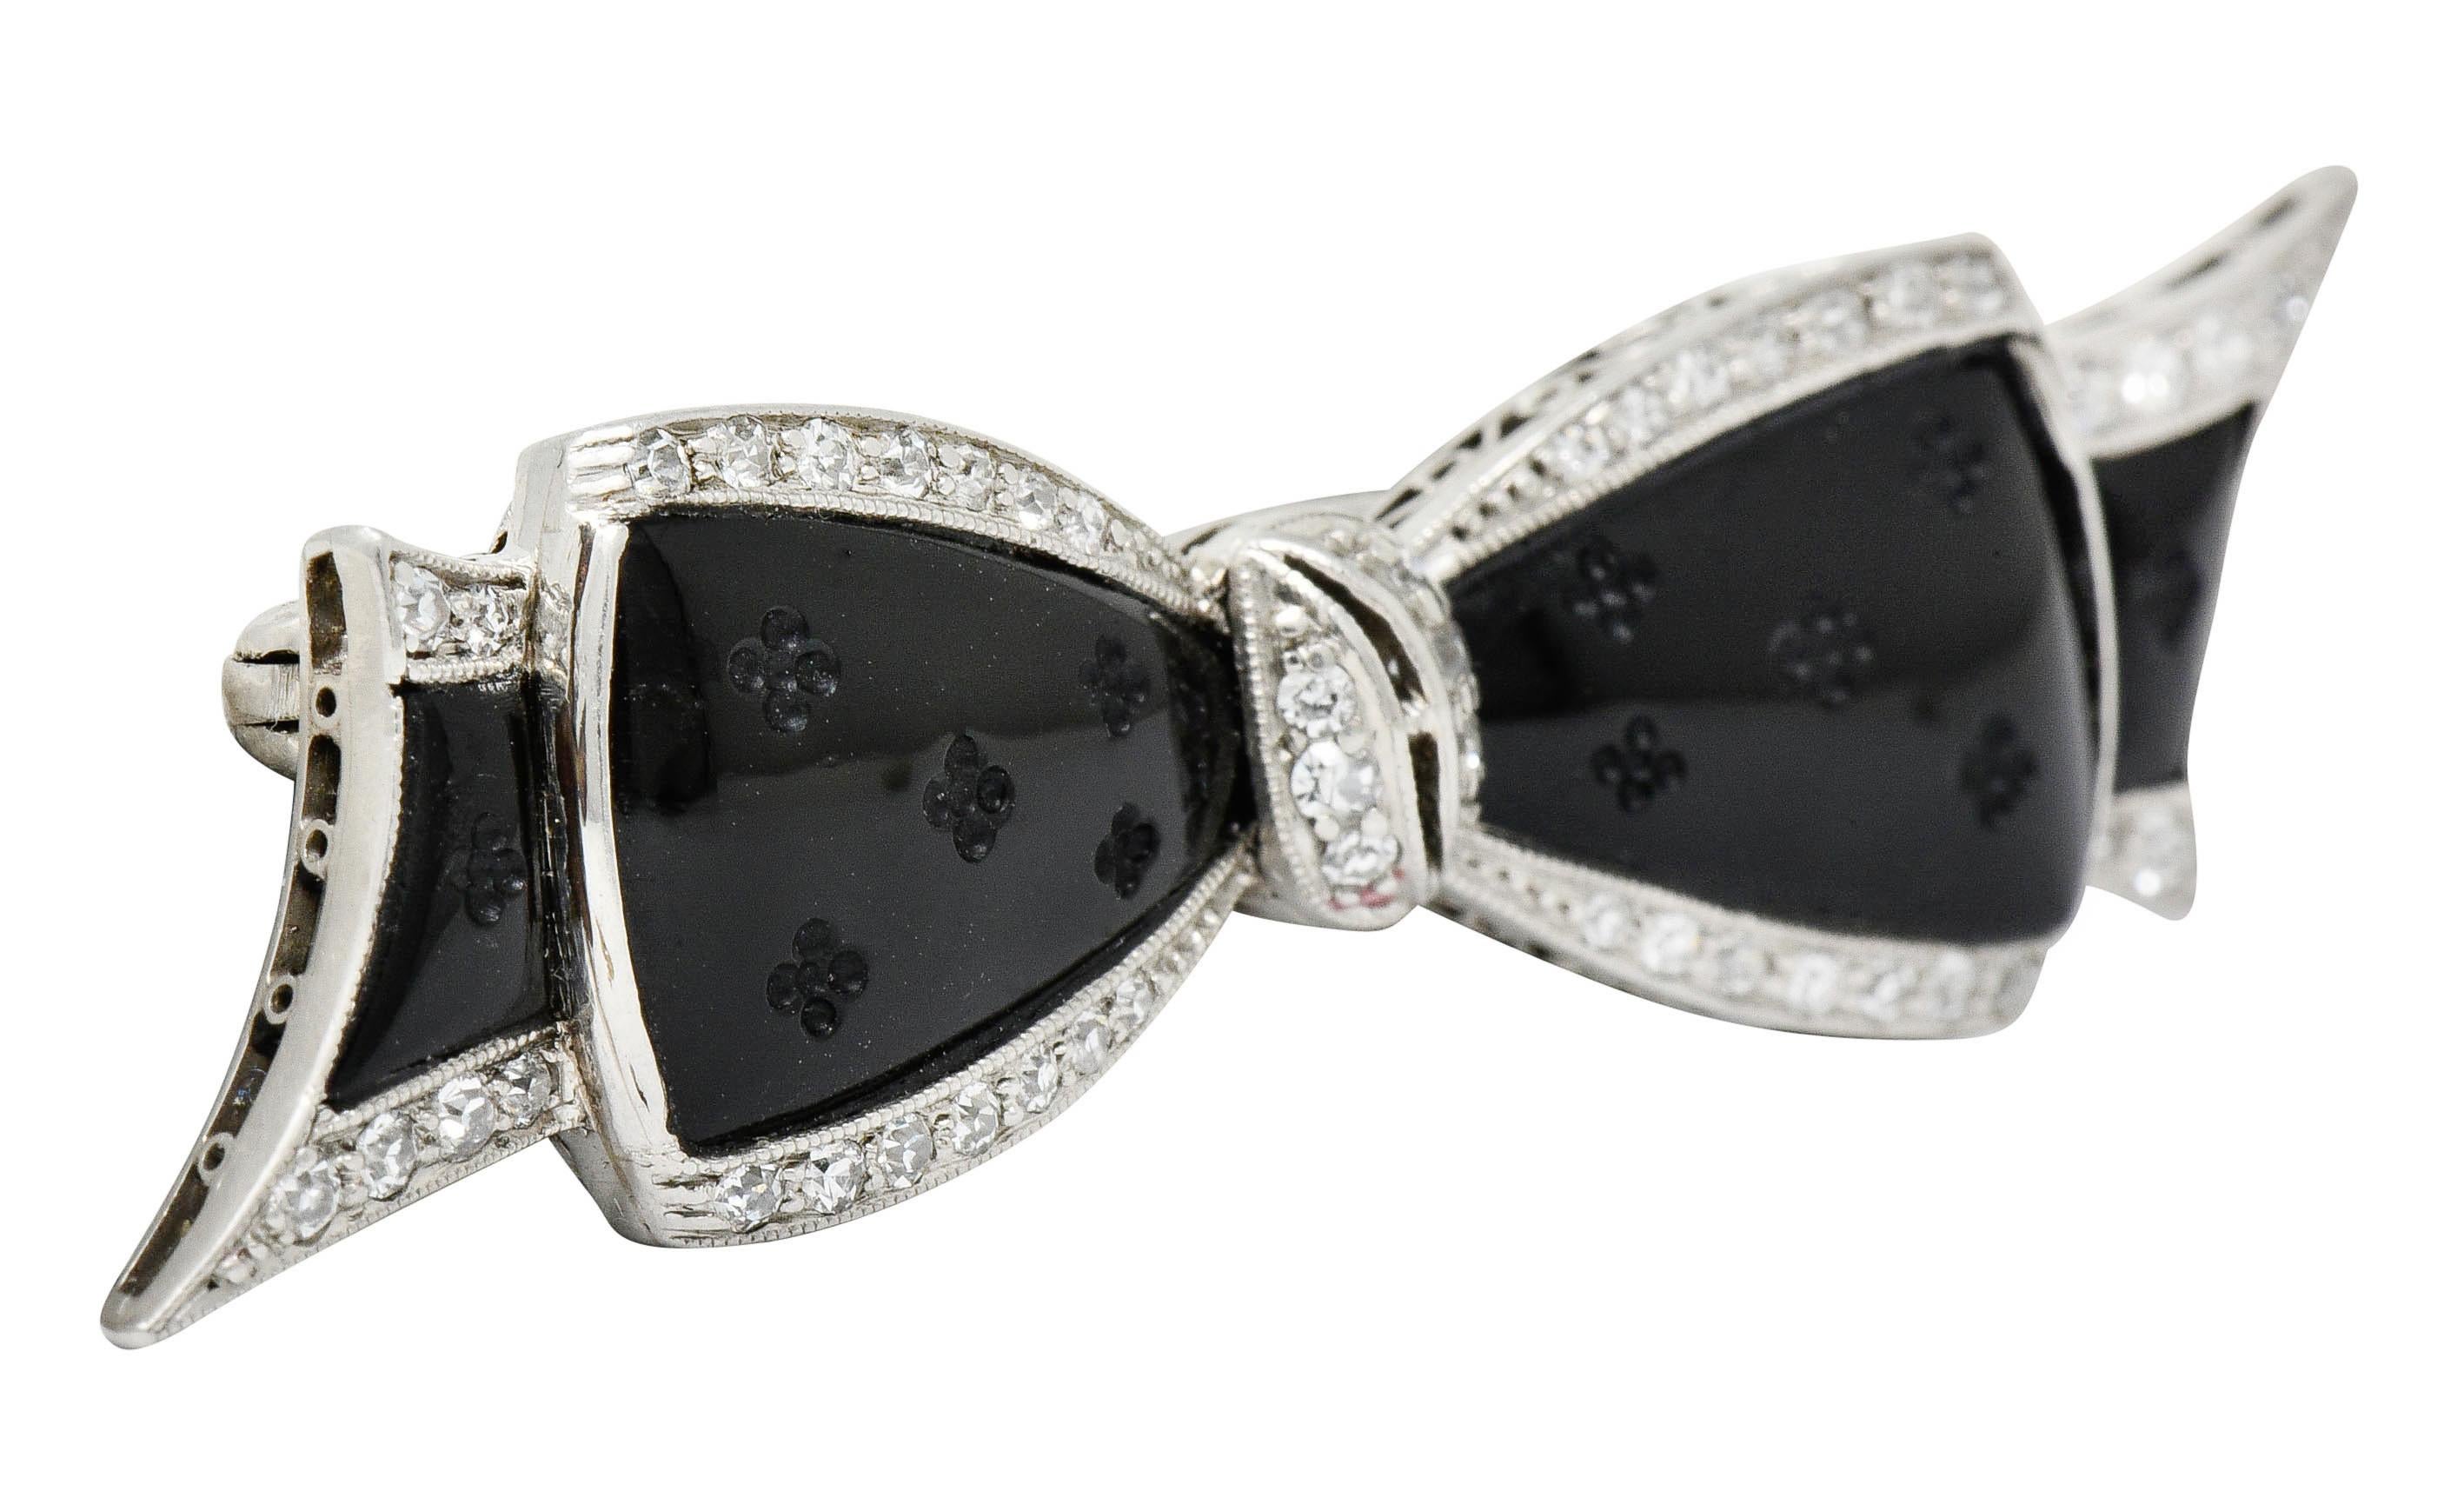 Brooch is designed as a stylized bow with a milgrain platinum frame decorated with a pierced and ornately scrolled gallery

Centering calibré cut onyx, as a bow motif, deeply engraved with a floral pattern

Accented throughout by single cut diamonds